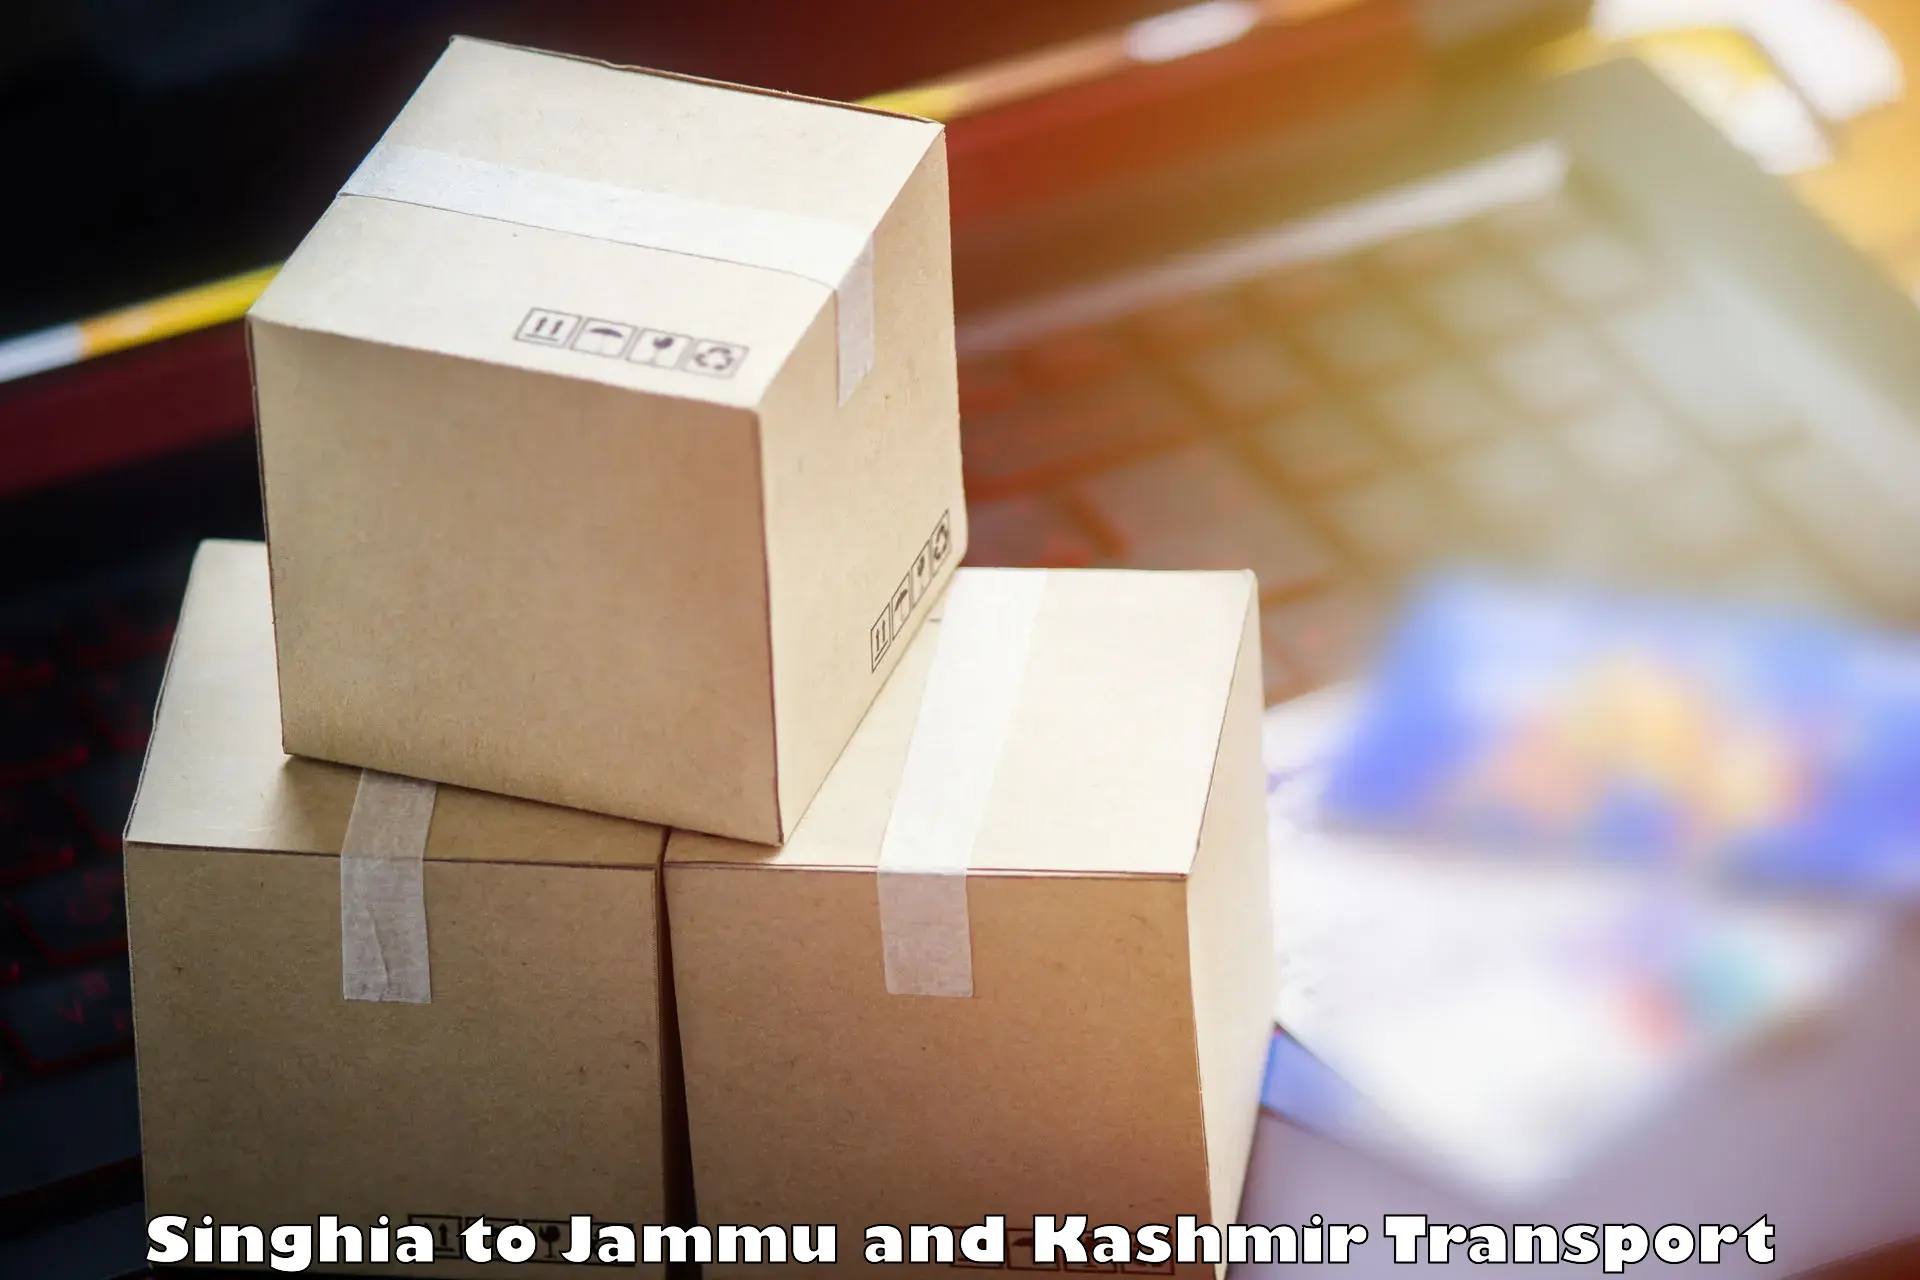 Cargo transport services in Singhia to Baramulla